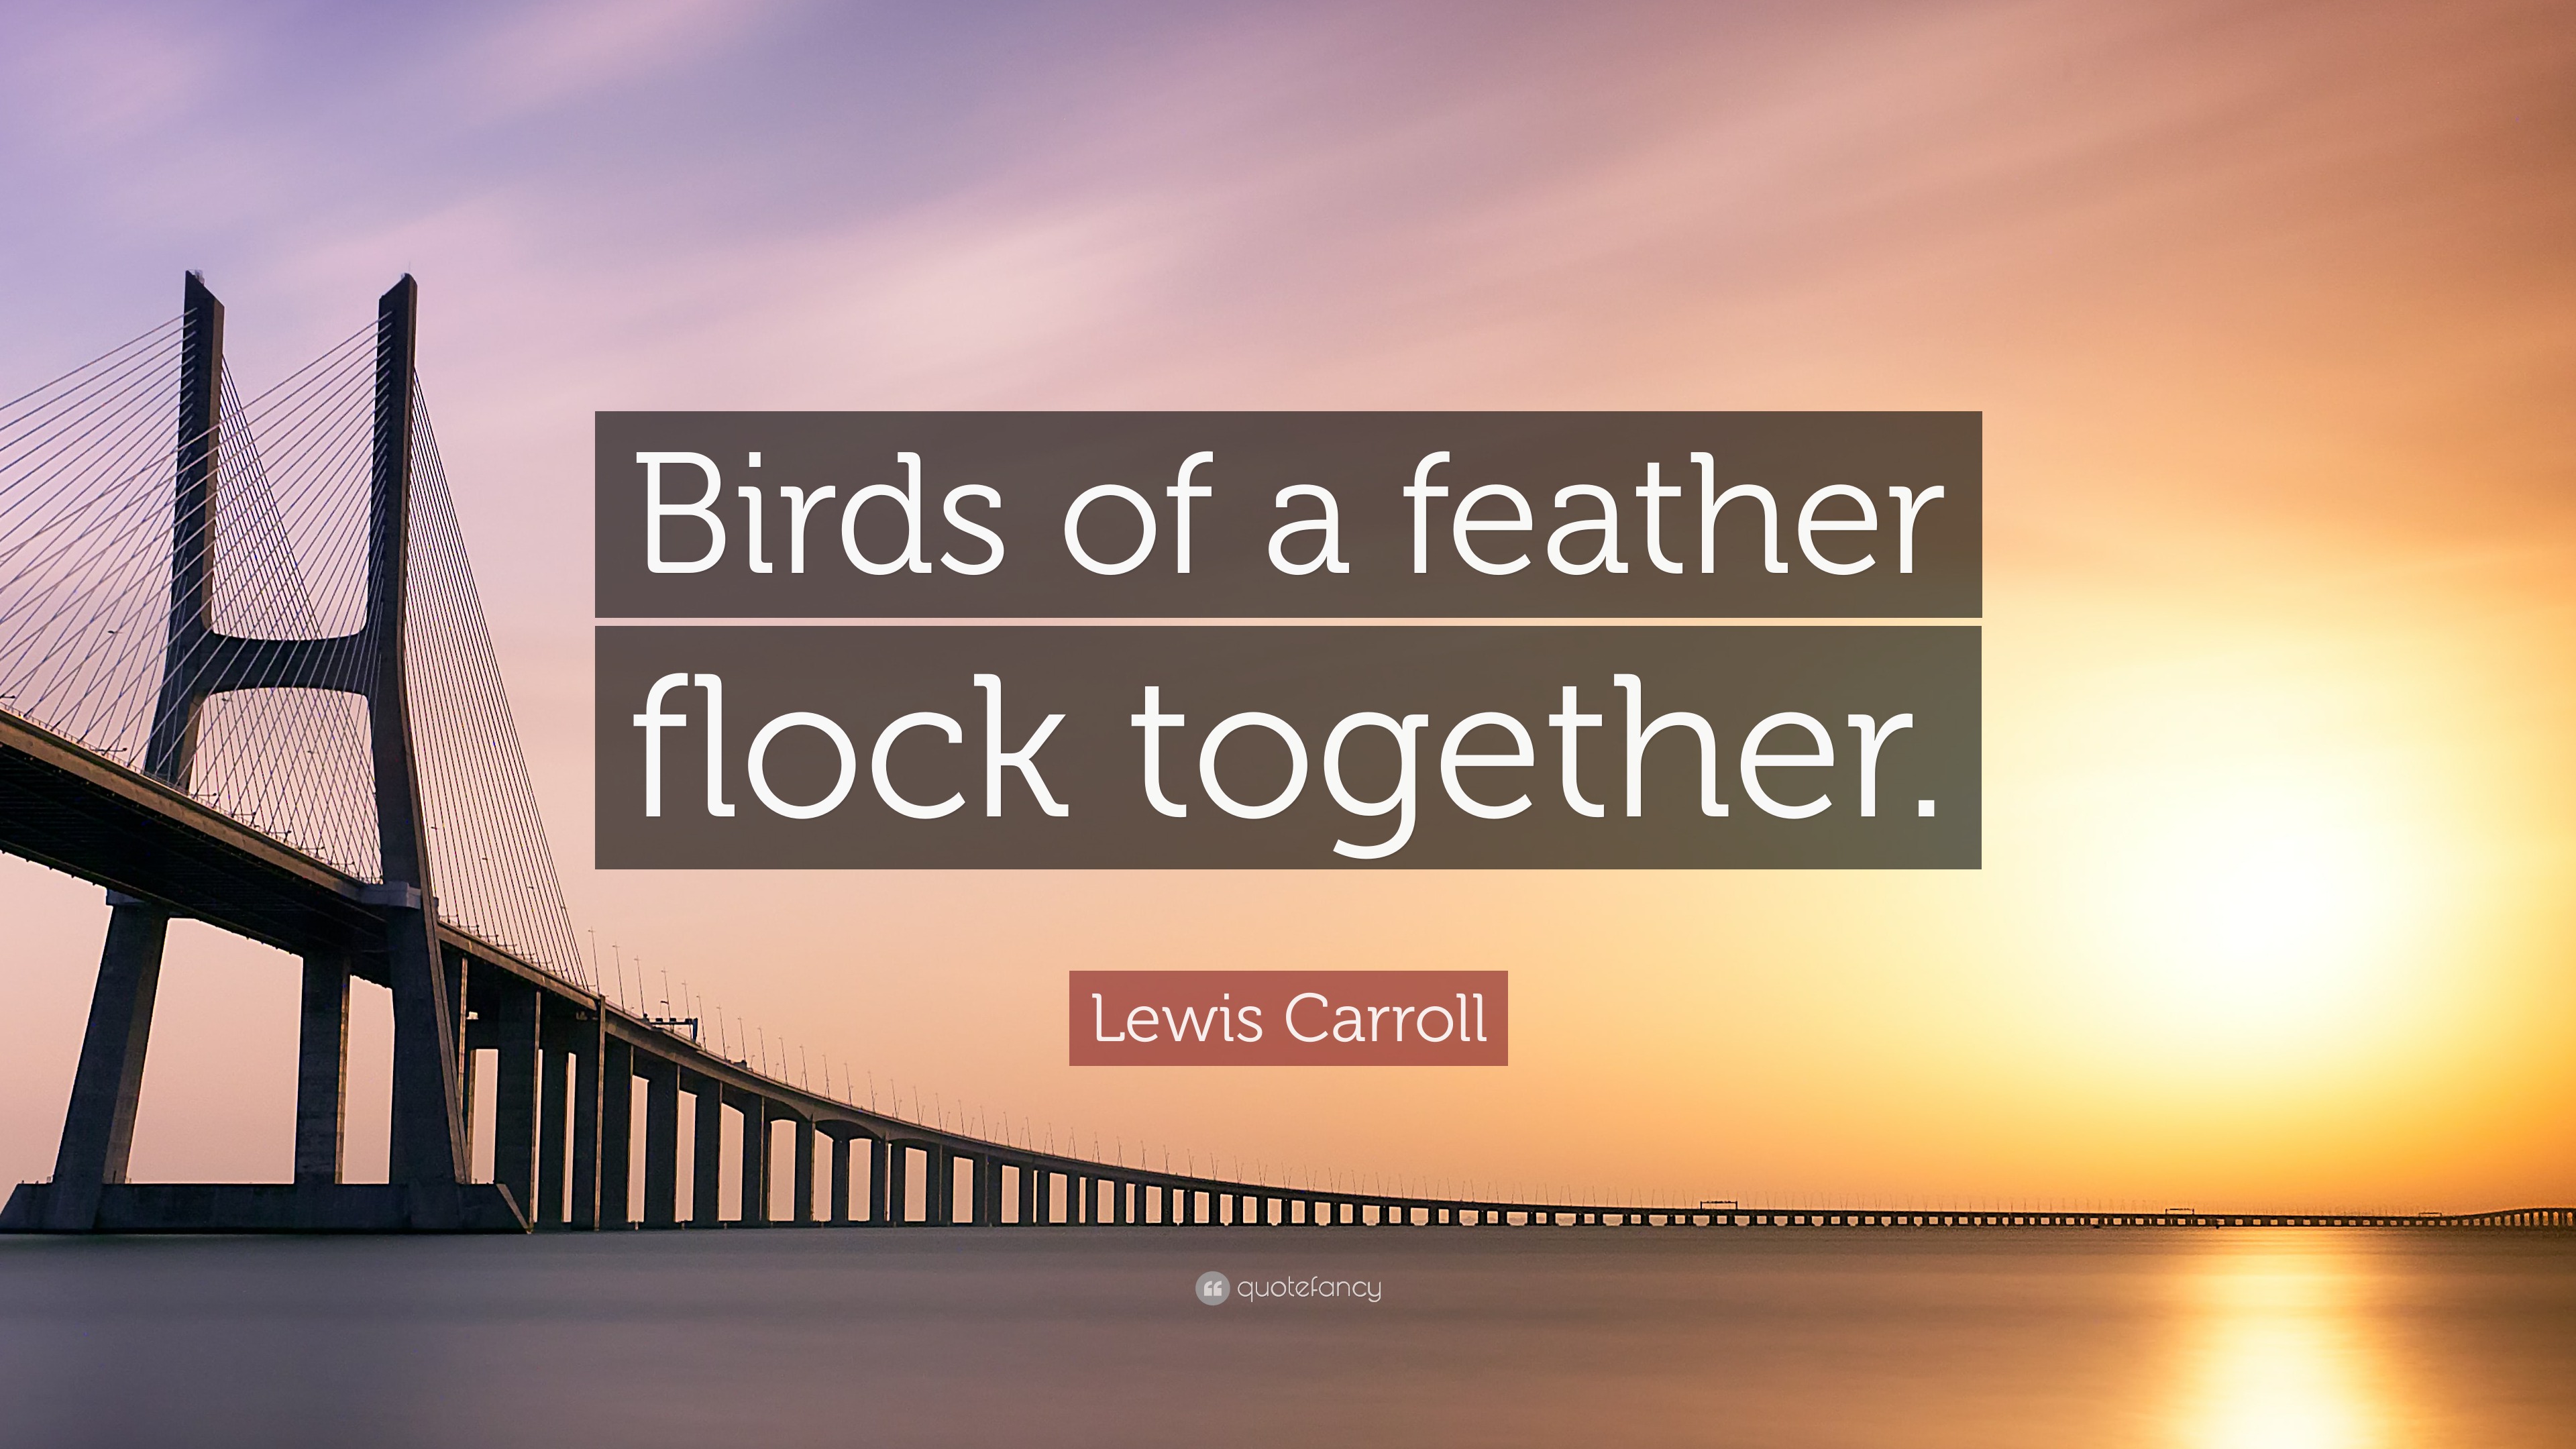 Lewis Carroll Quote “Birds of a feather flock together.”